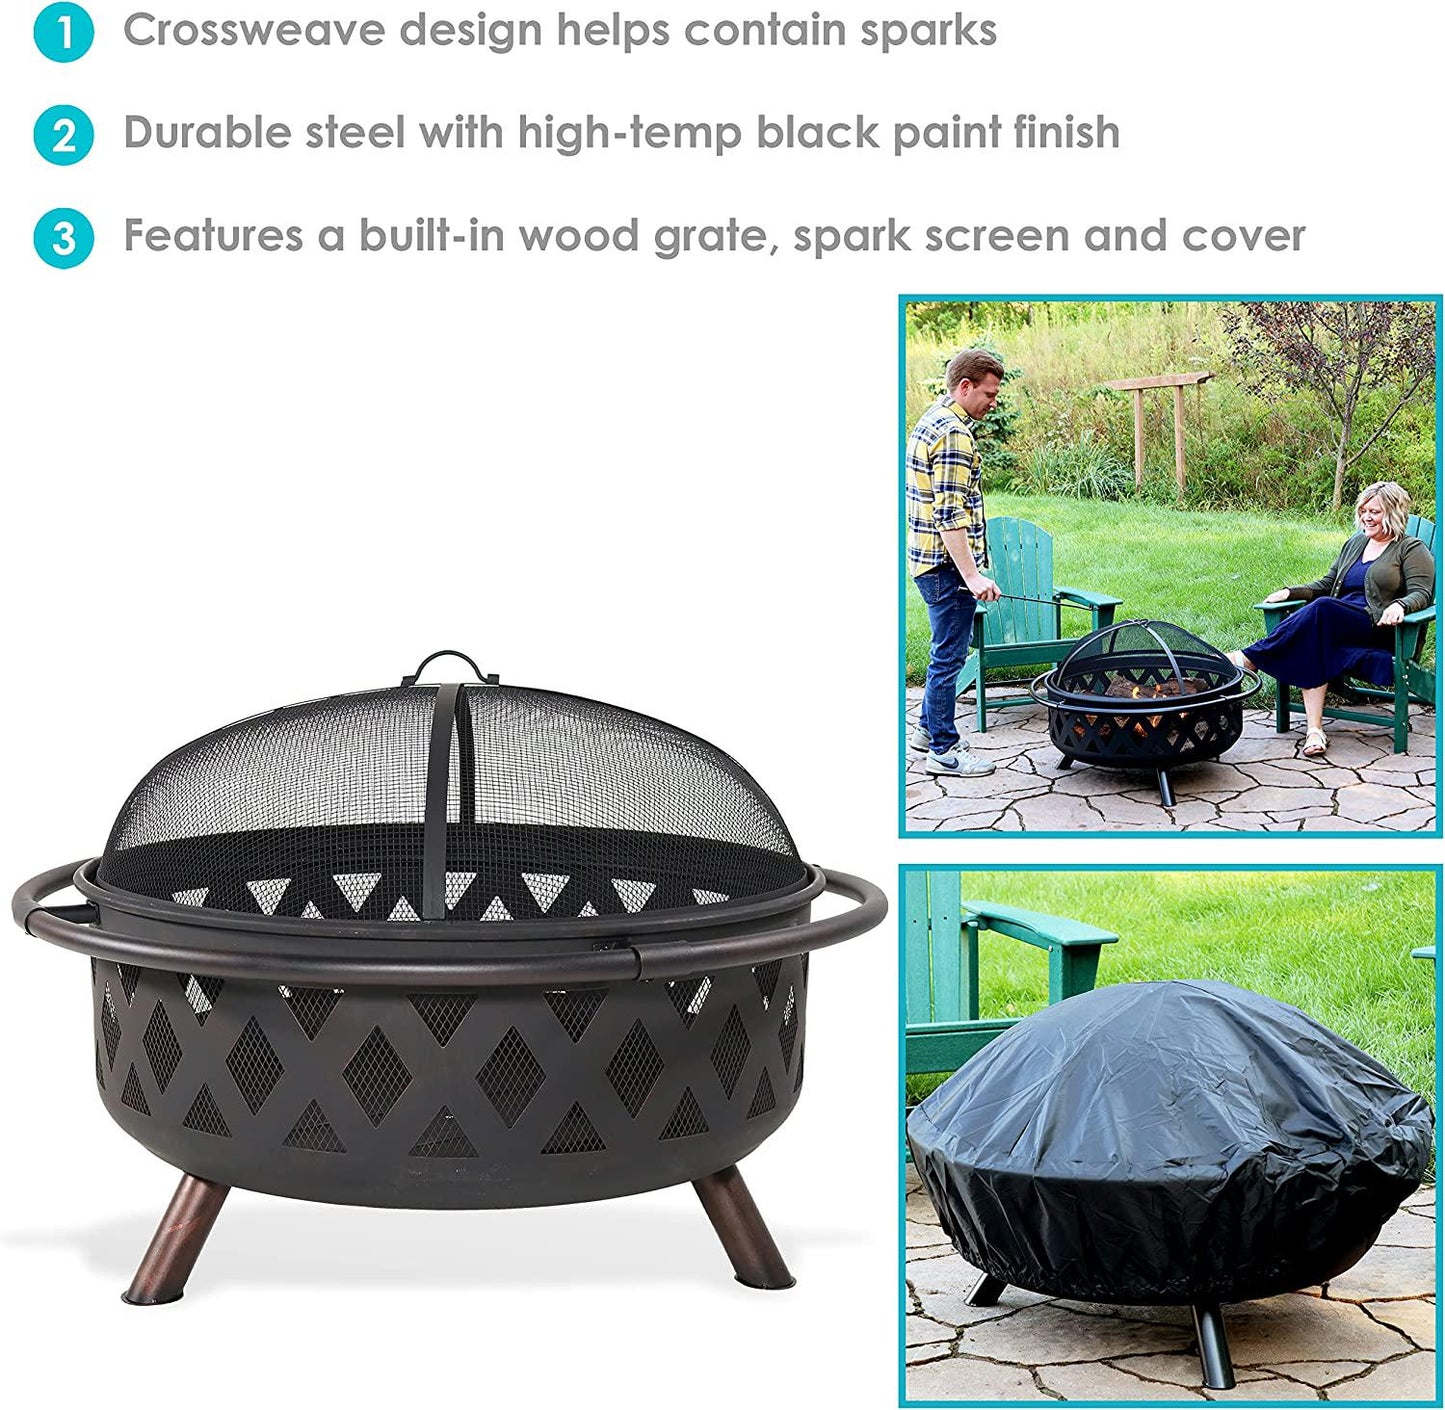 Black Crossweave Large Outdoor Fire Pit - 36-Inch Heavy-Duty Wood-Burning Fire Pit with Spark Screen for Patio and Backyard Bonfires - Includes Poker and Round Fire Pit Cover